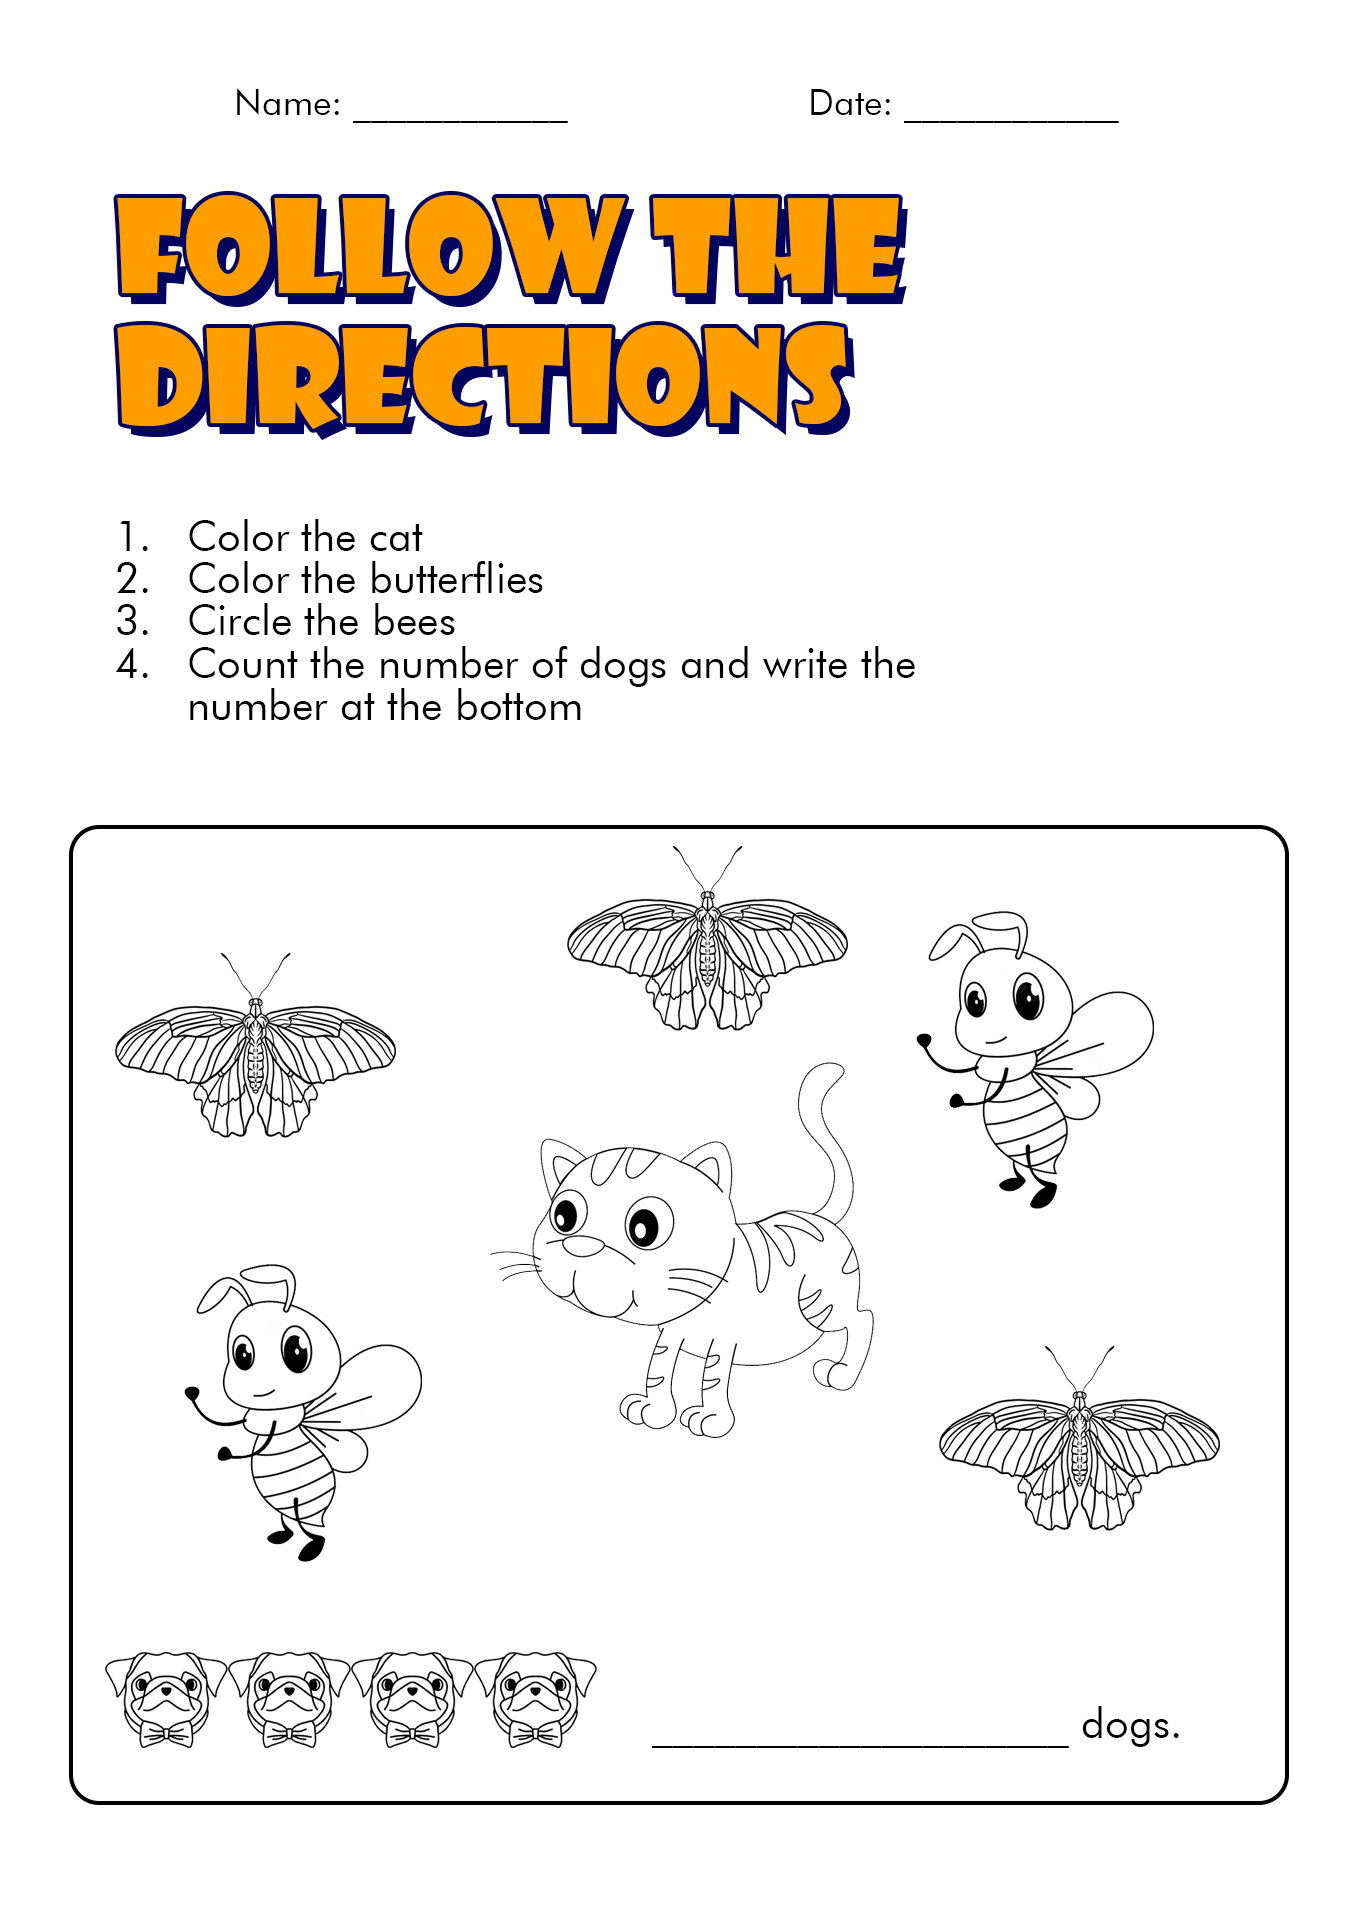 15 Best Images Of Following Directions First Grade Worksheets Ordinal Numbers Worksheet